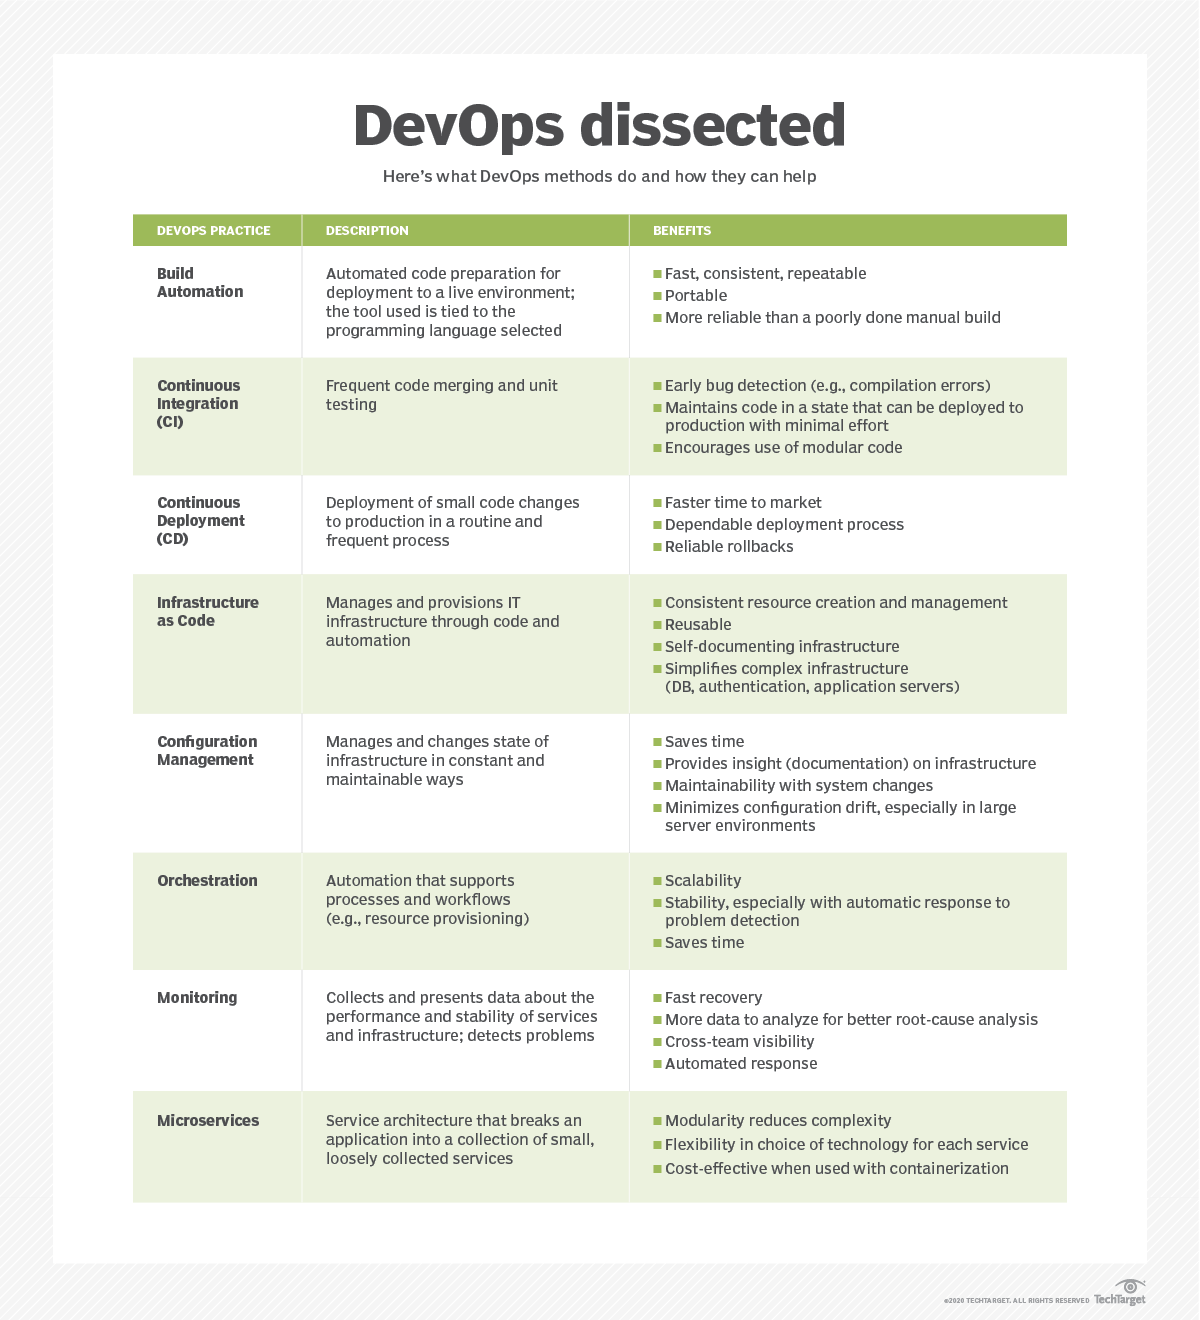 itops-devops_dissected-f